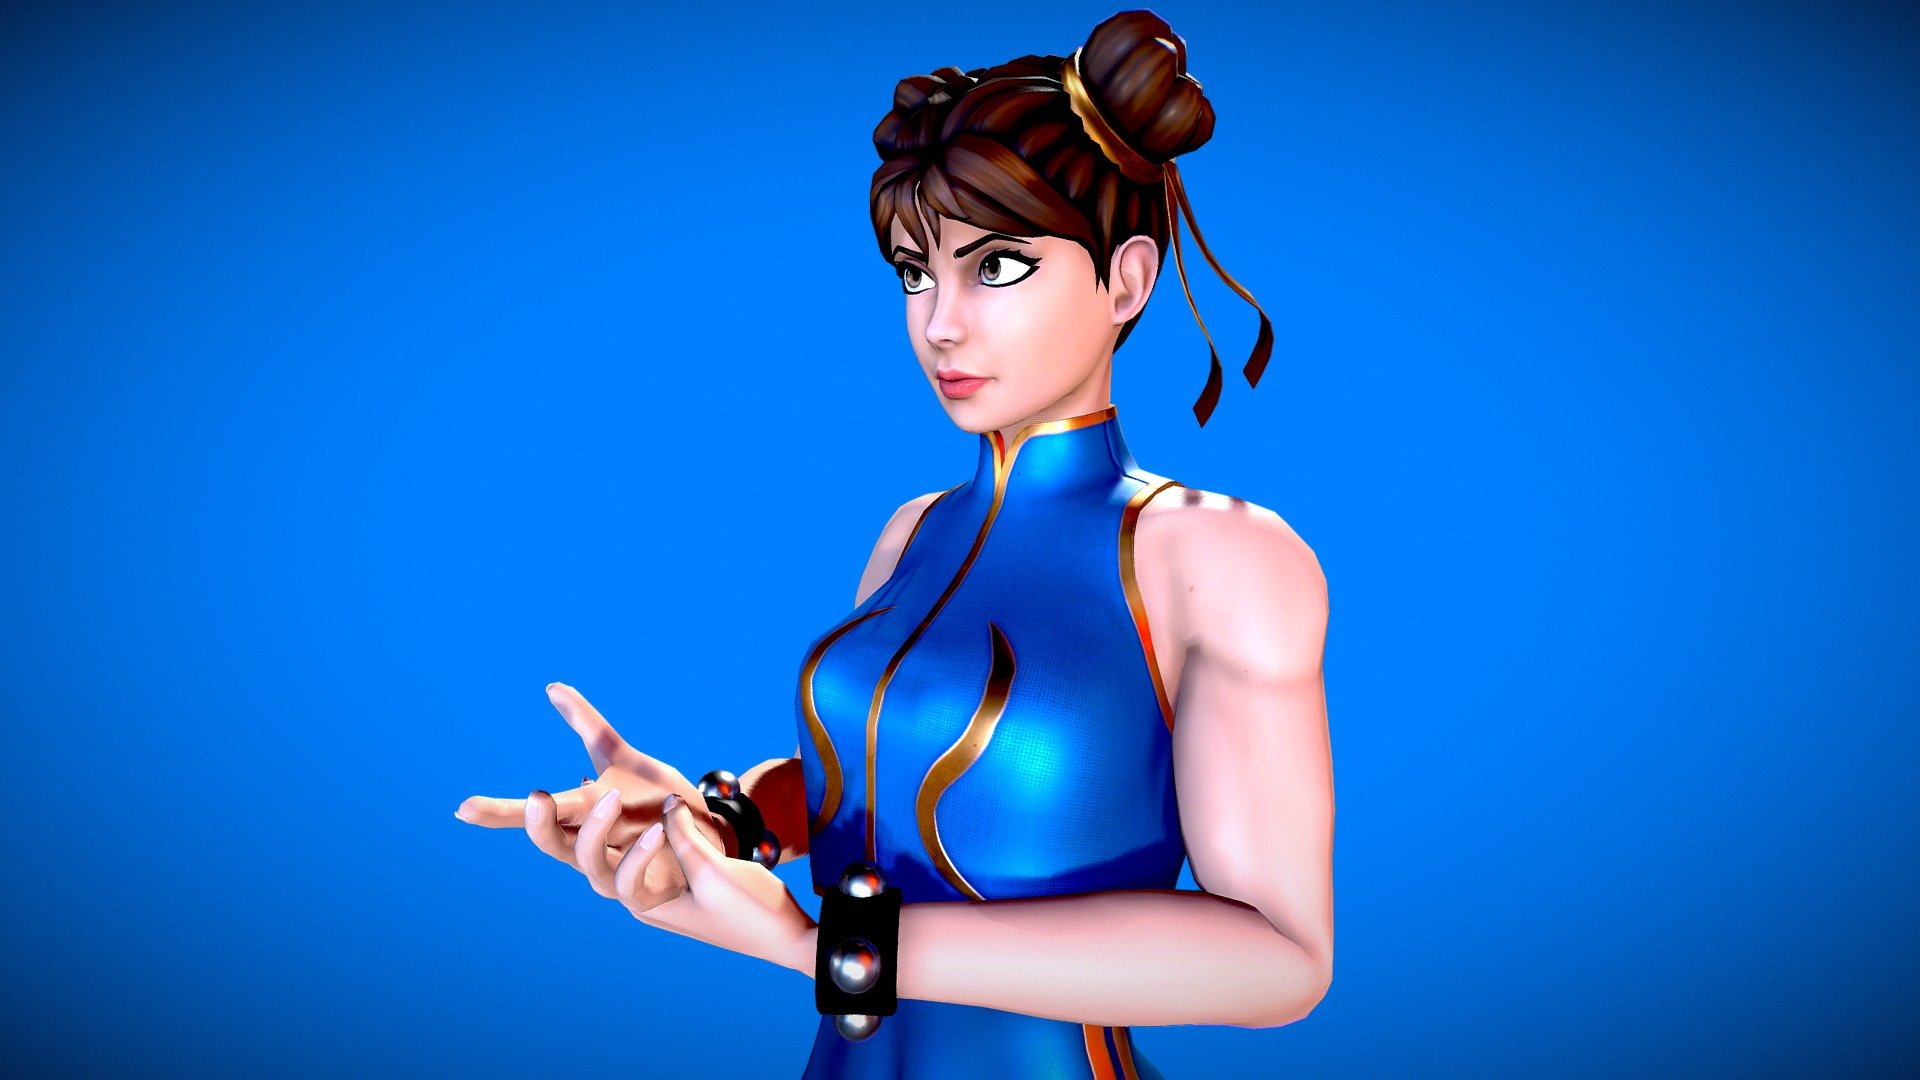 Character in the Street Fighter series.

Animation and 3D-model  made in Blender, texturing in Substance Painter 3d model